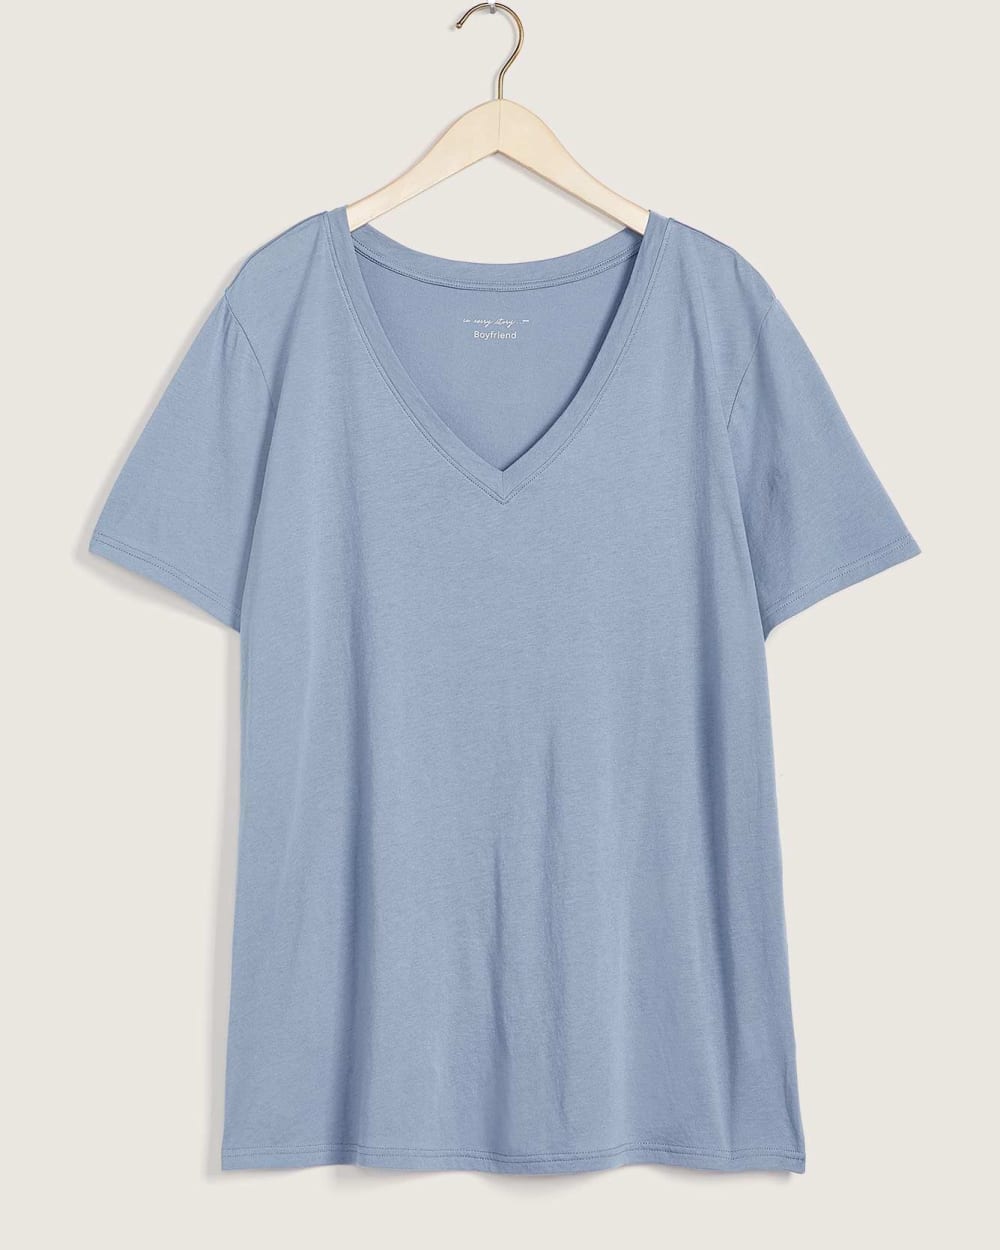 Boyfriend Fit V-Neck T-Shirt - In Every Story